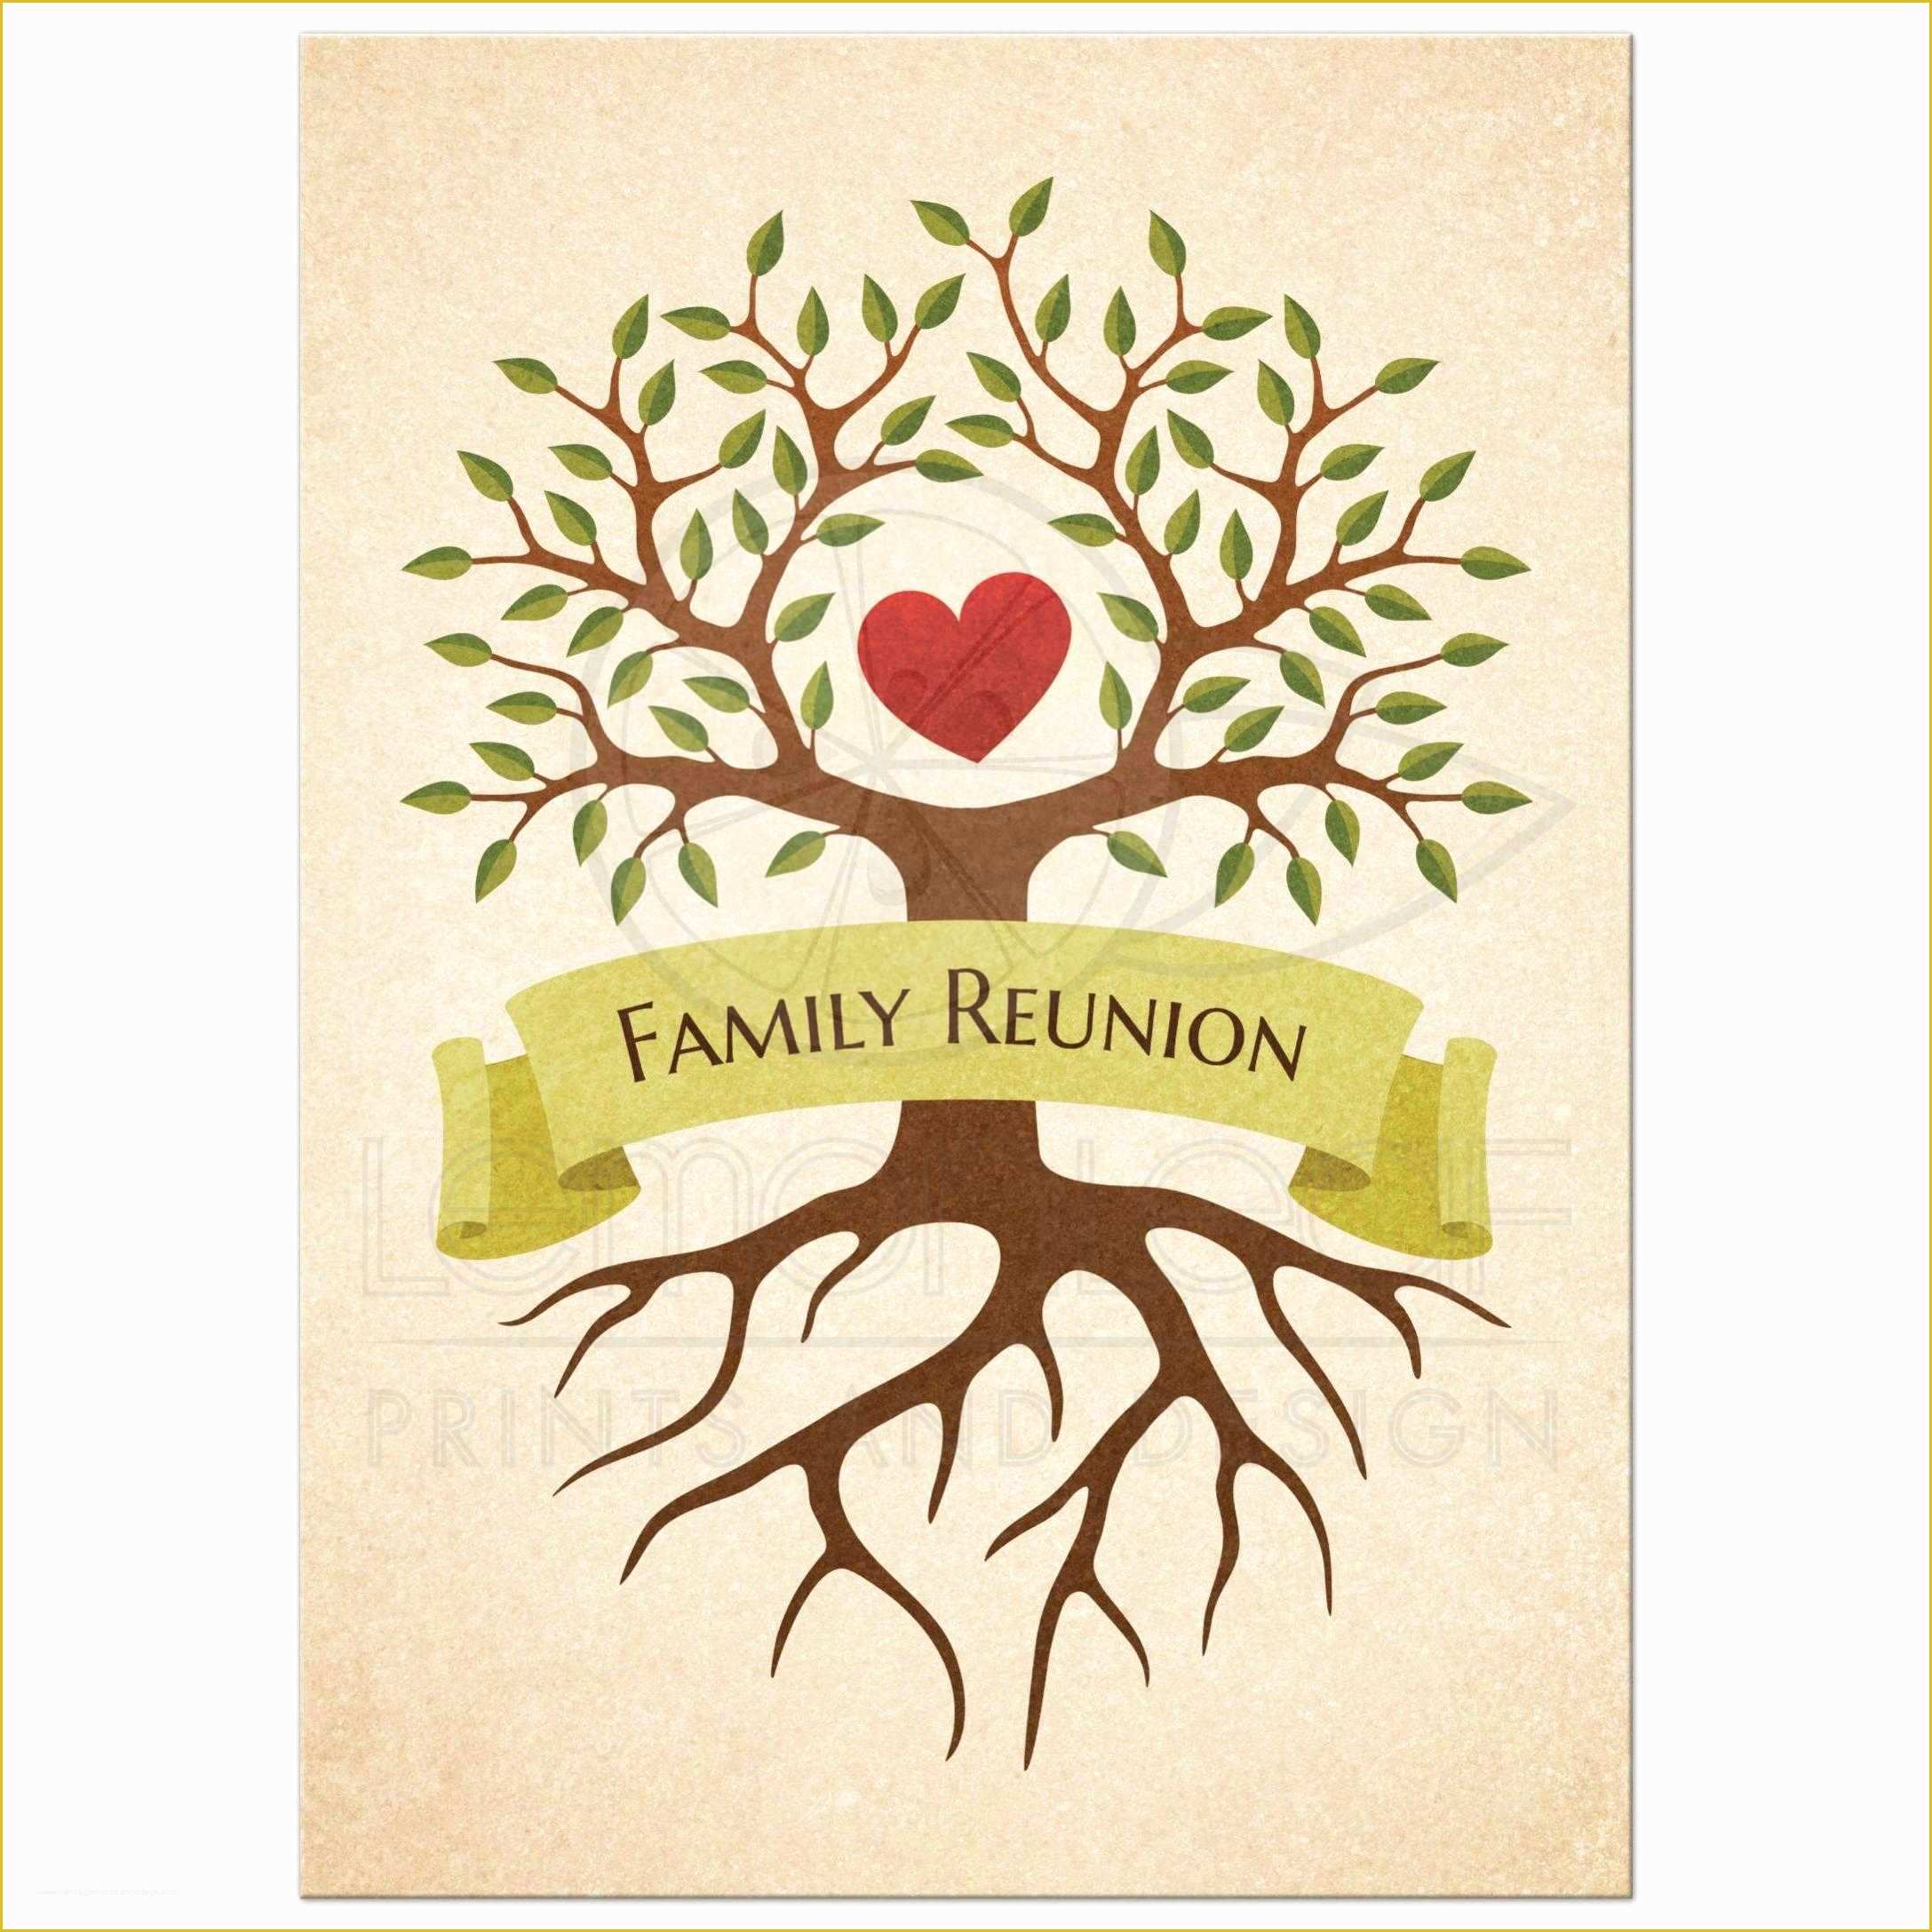 Free Printable Save the Date Family Reunion Templates Of Family Reunion Invitations with Beautiful Heart Tree